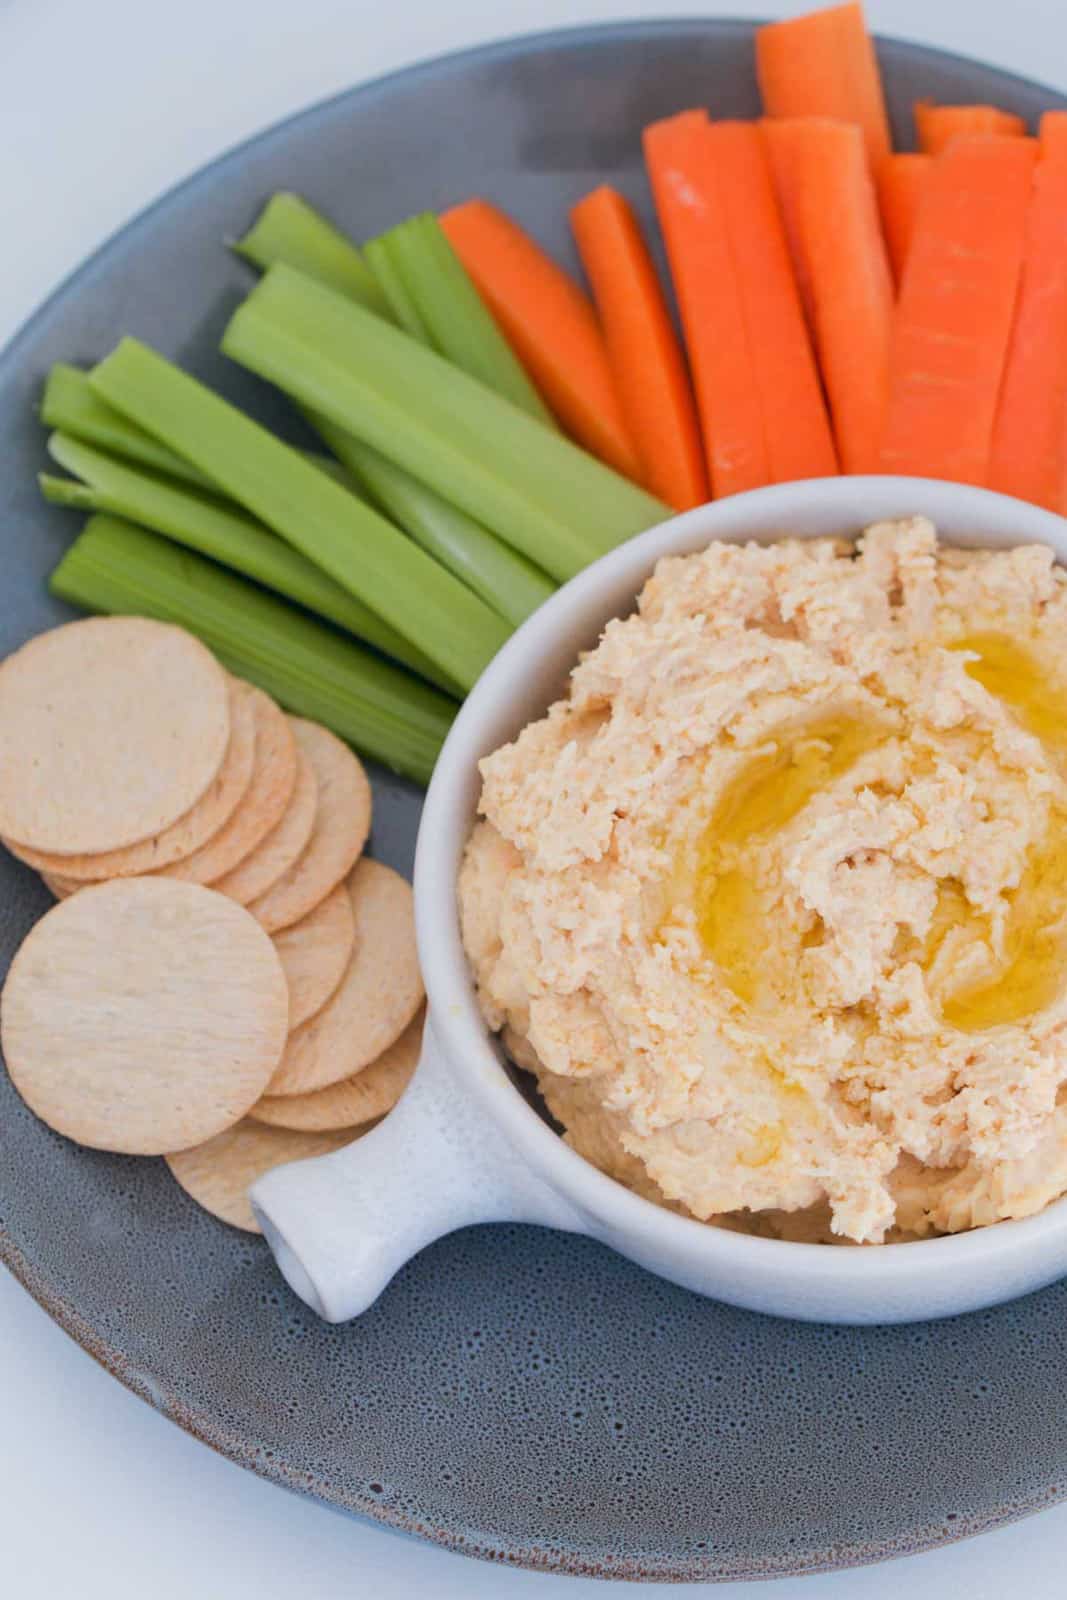 Crackers, carrot and celery around a bowl of smooth hummus.